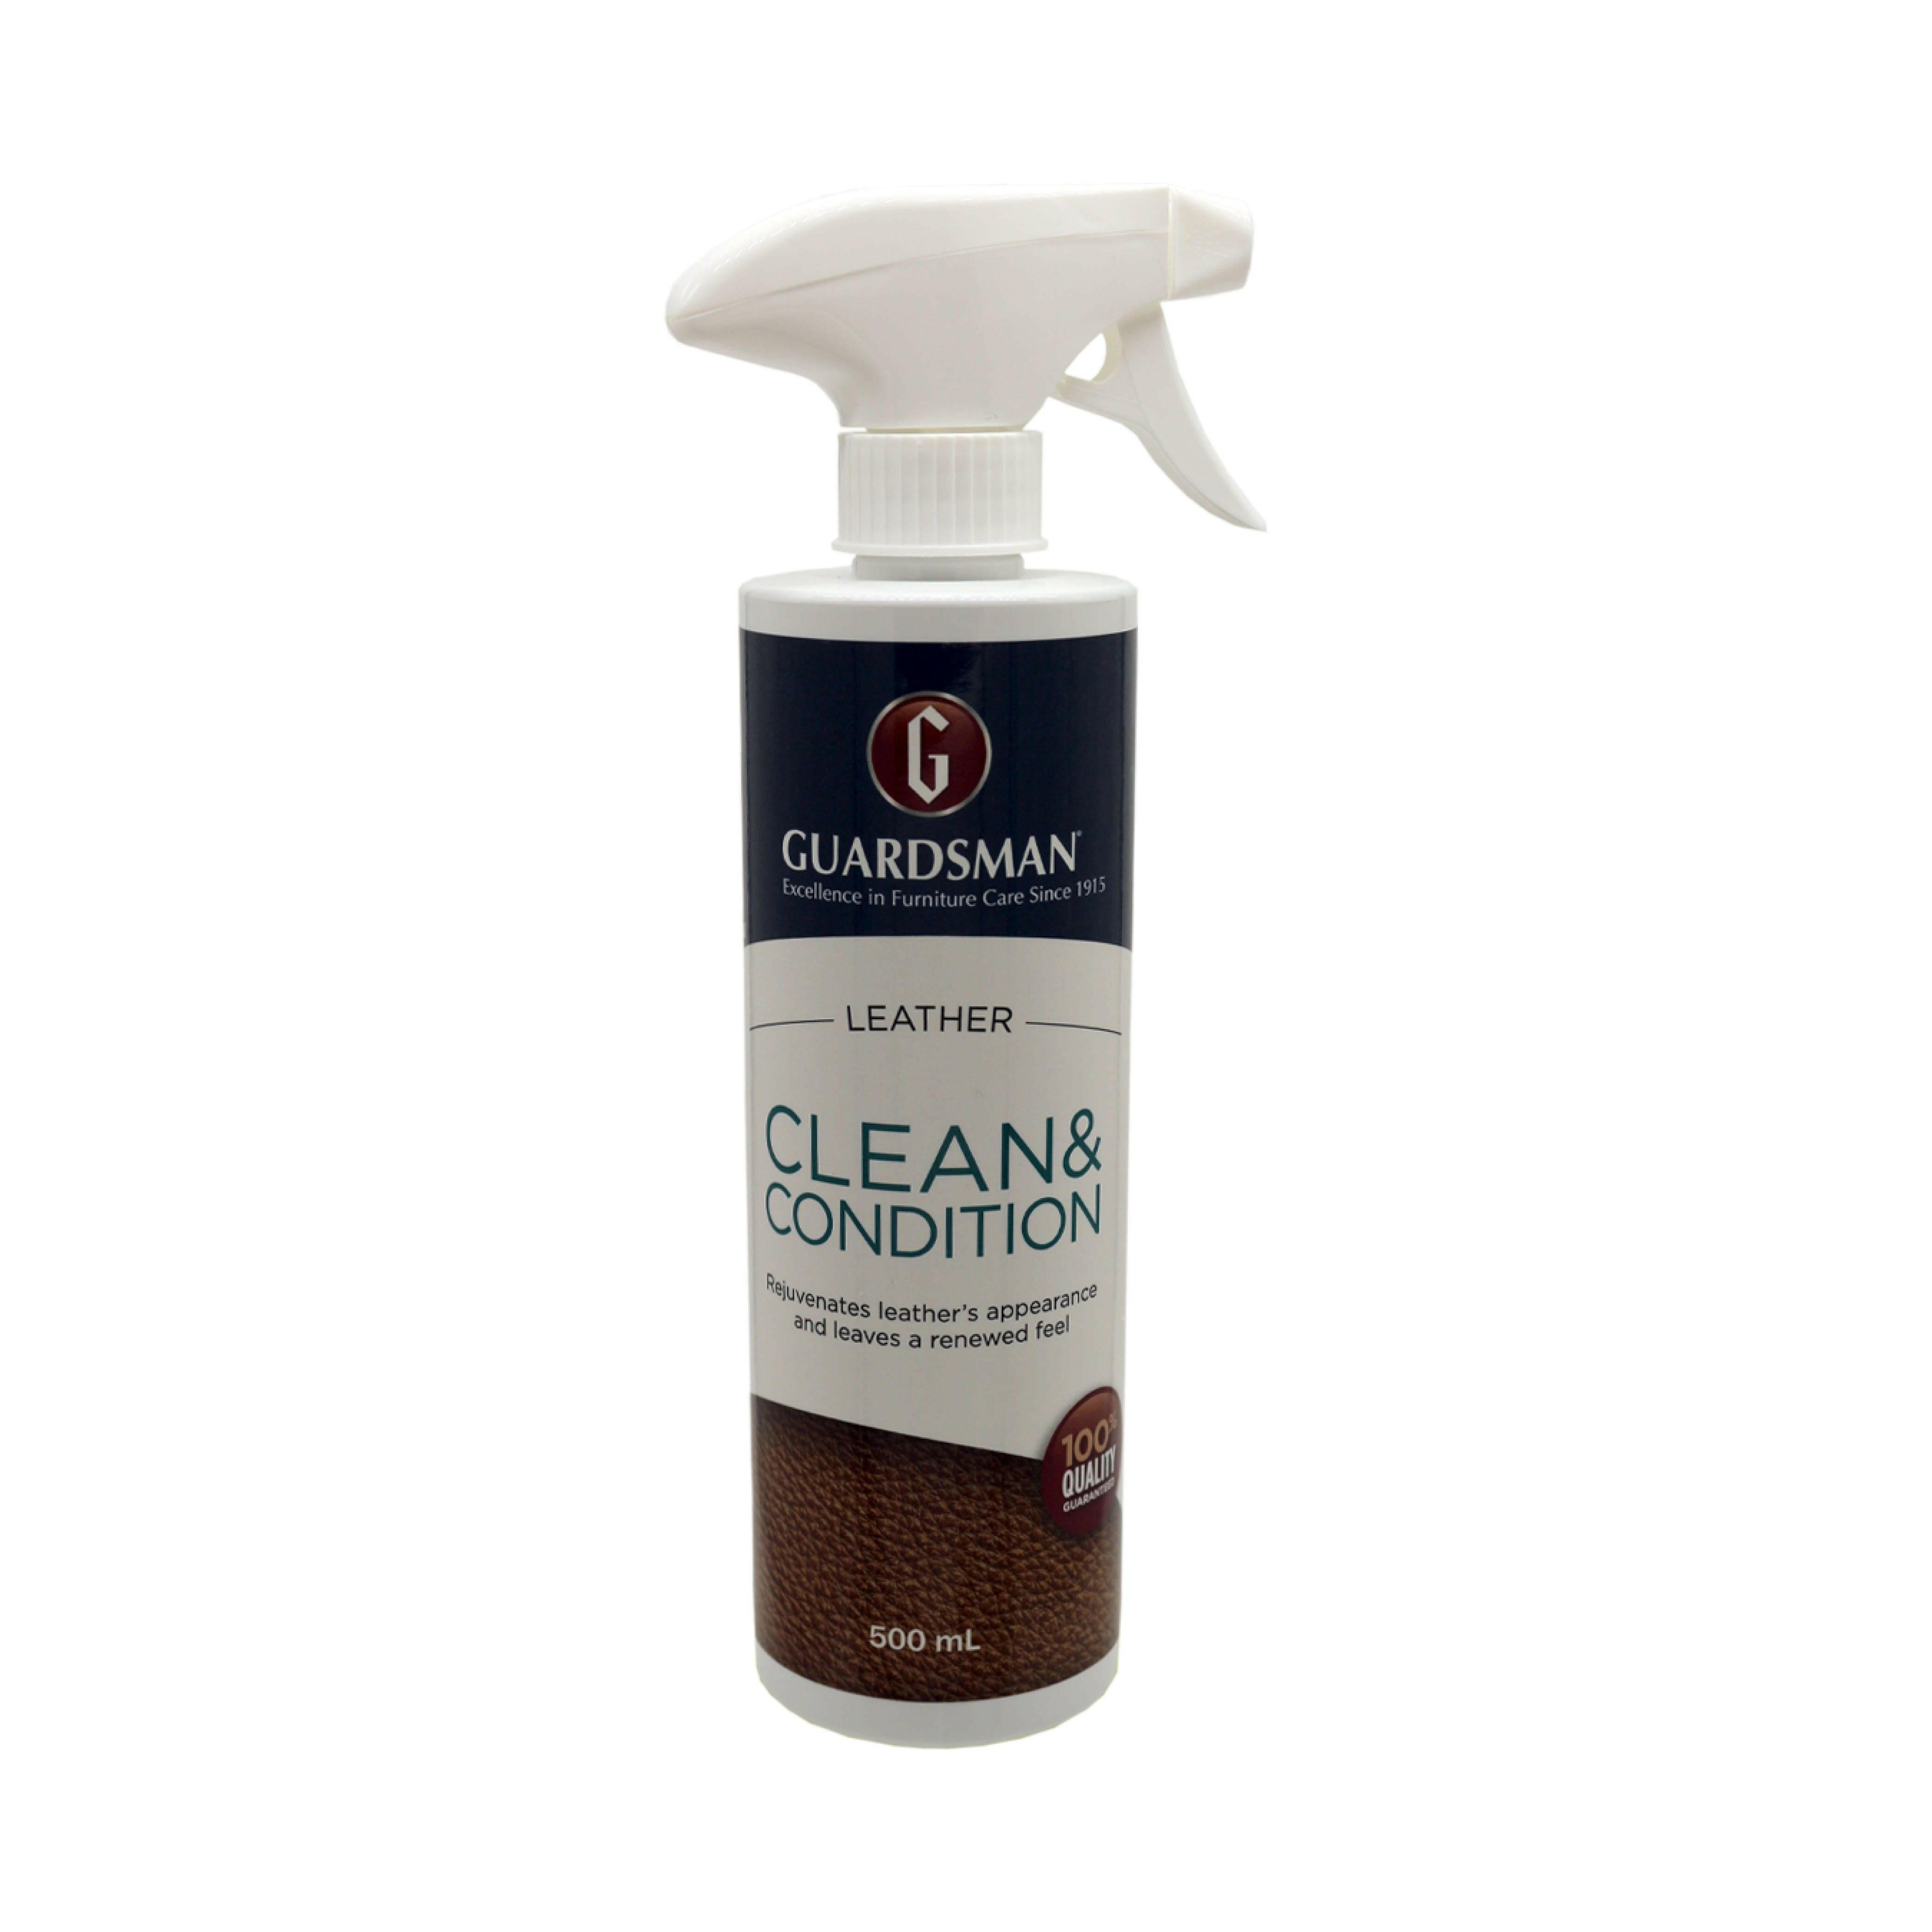 Guardsman Leather Clean and Condition Spray | Leather Care & Clean | Brilliant Home Living